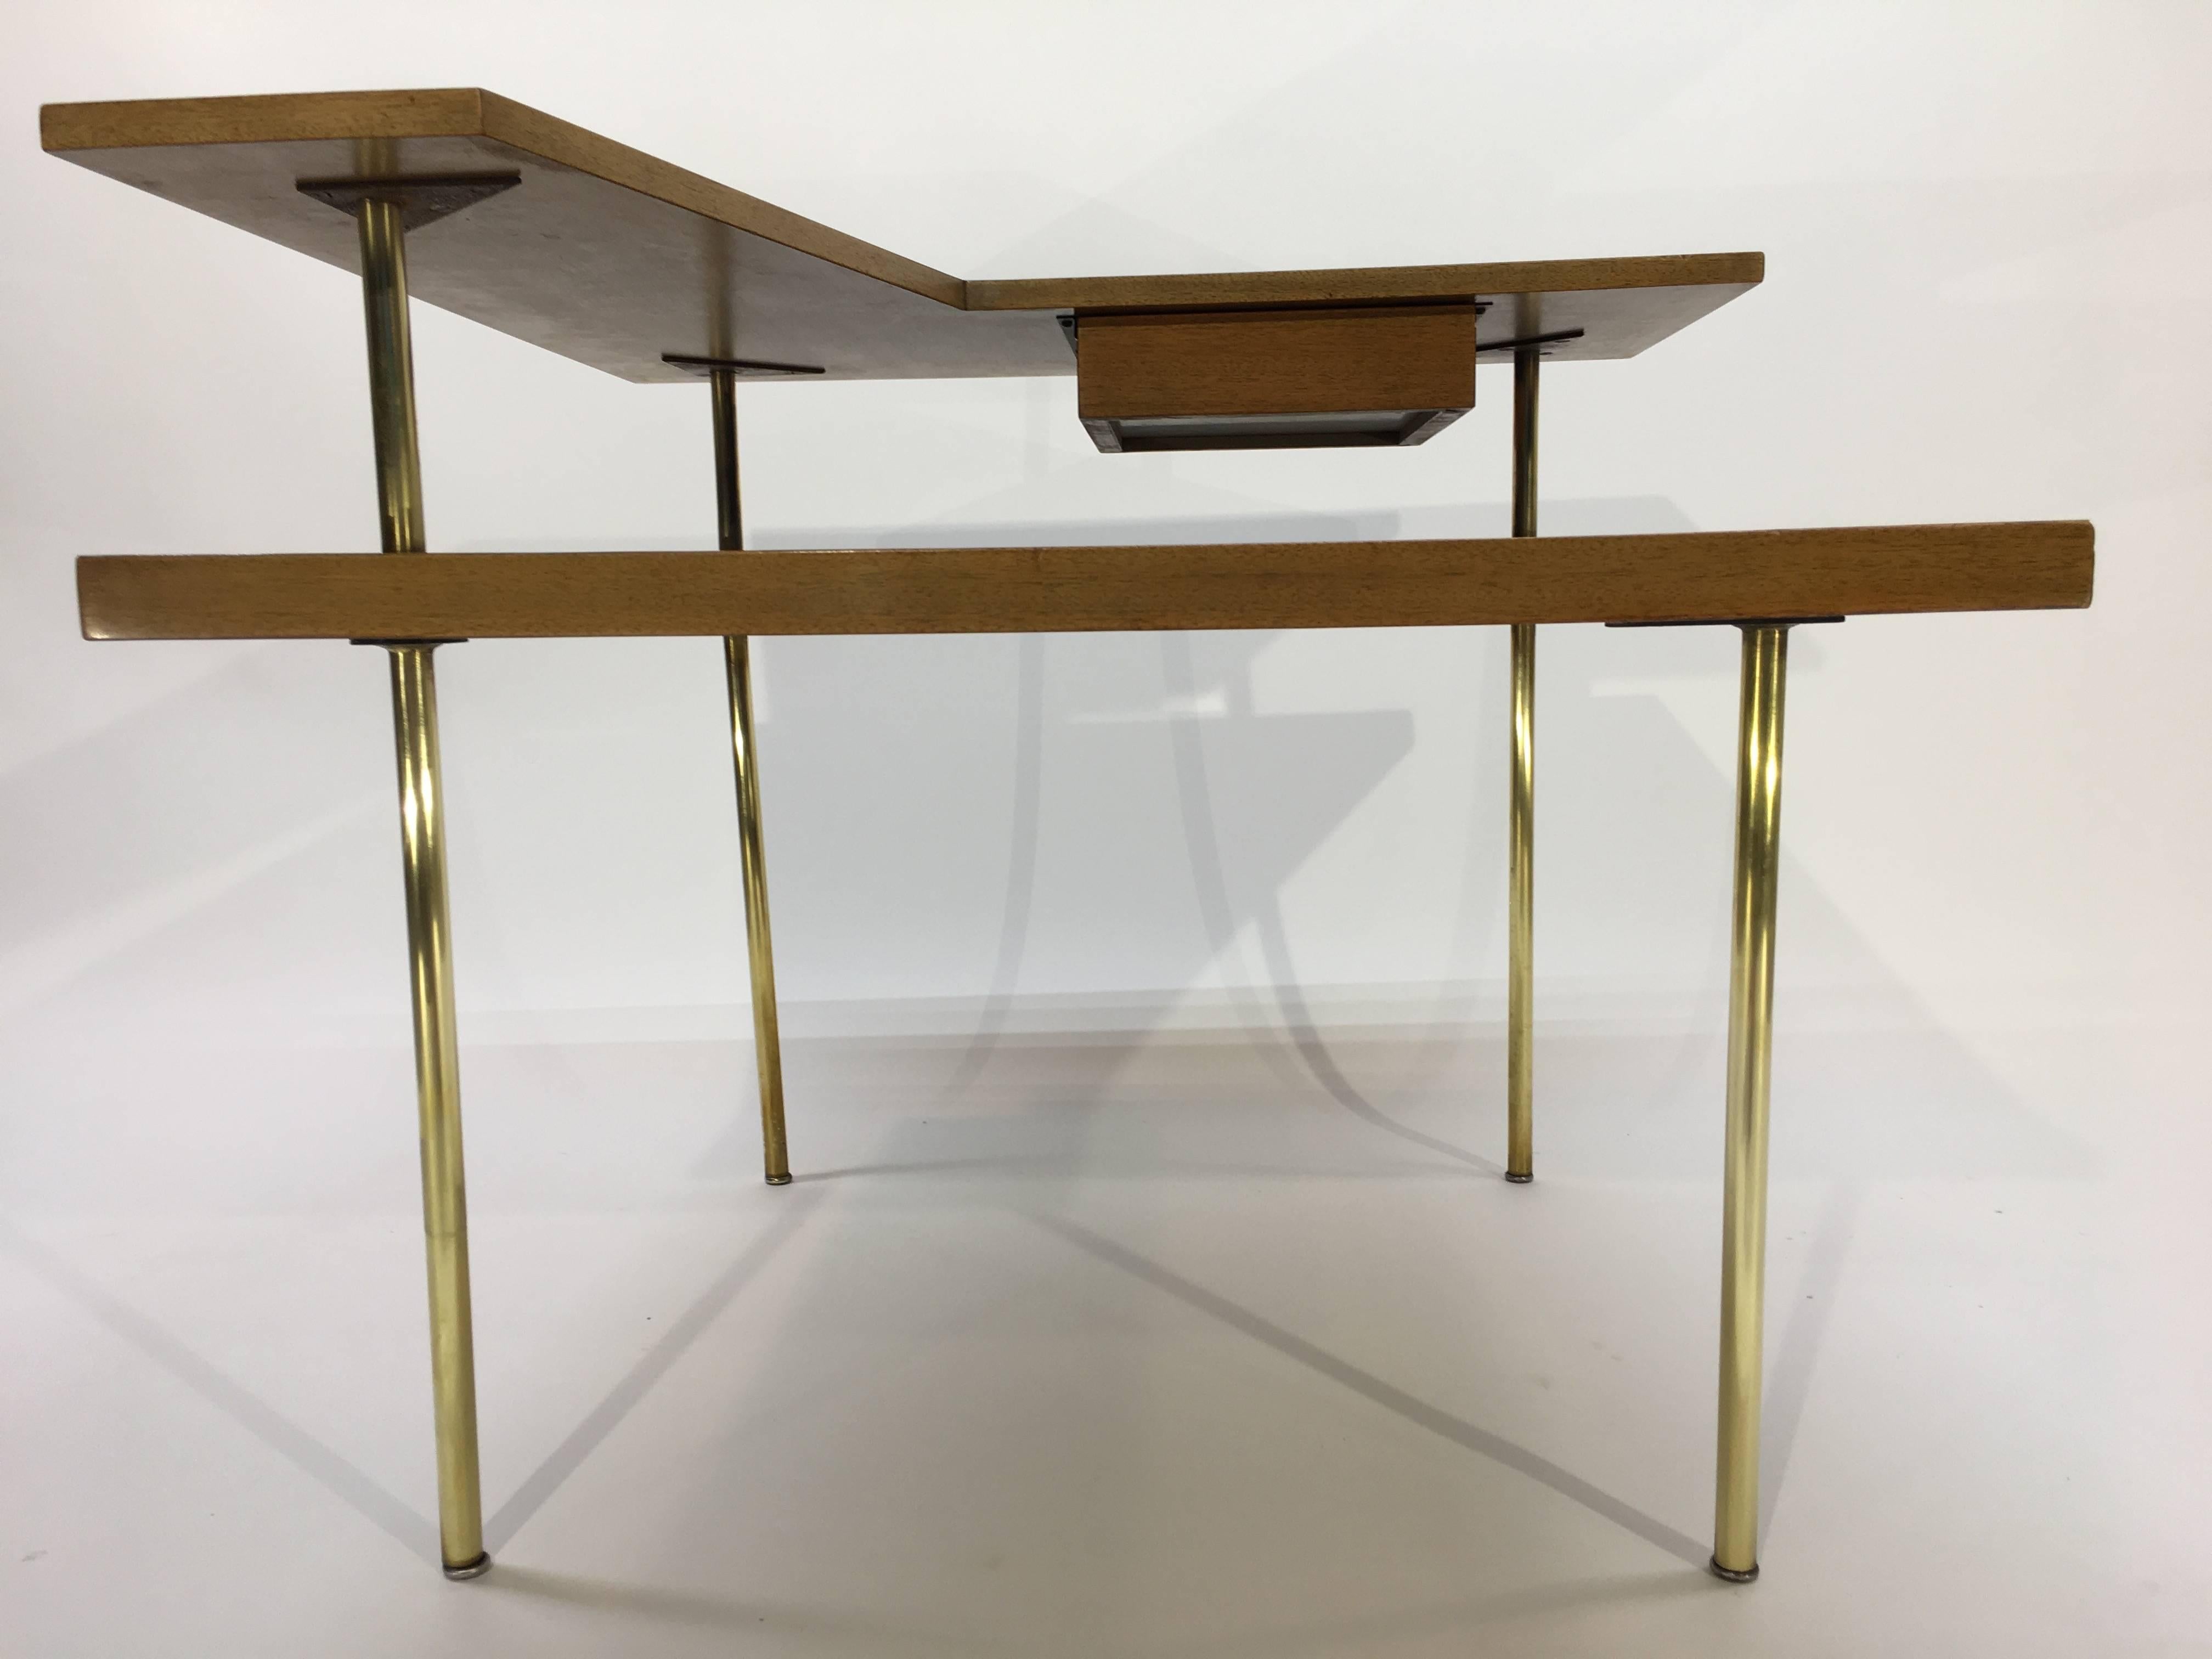 An Atomic era corner table by Harvey Probber having a single drawer and brass legs.
Measure: Height to first table is 19.75